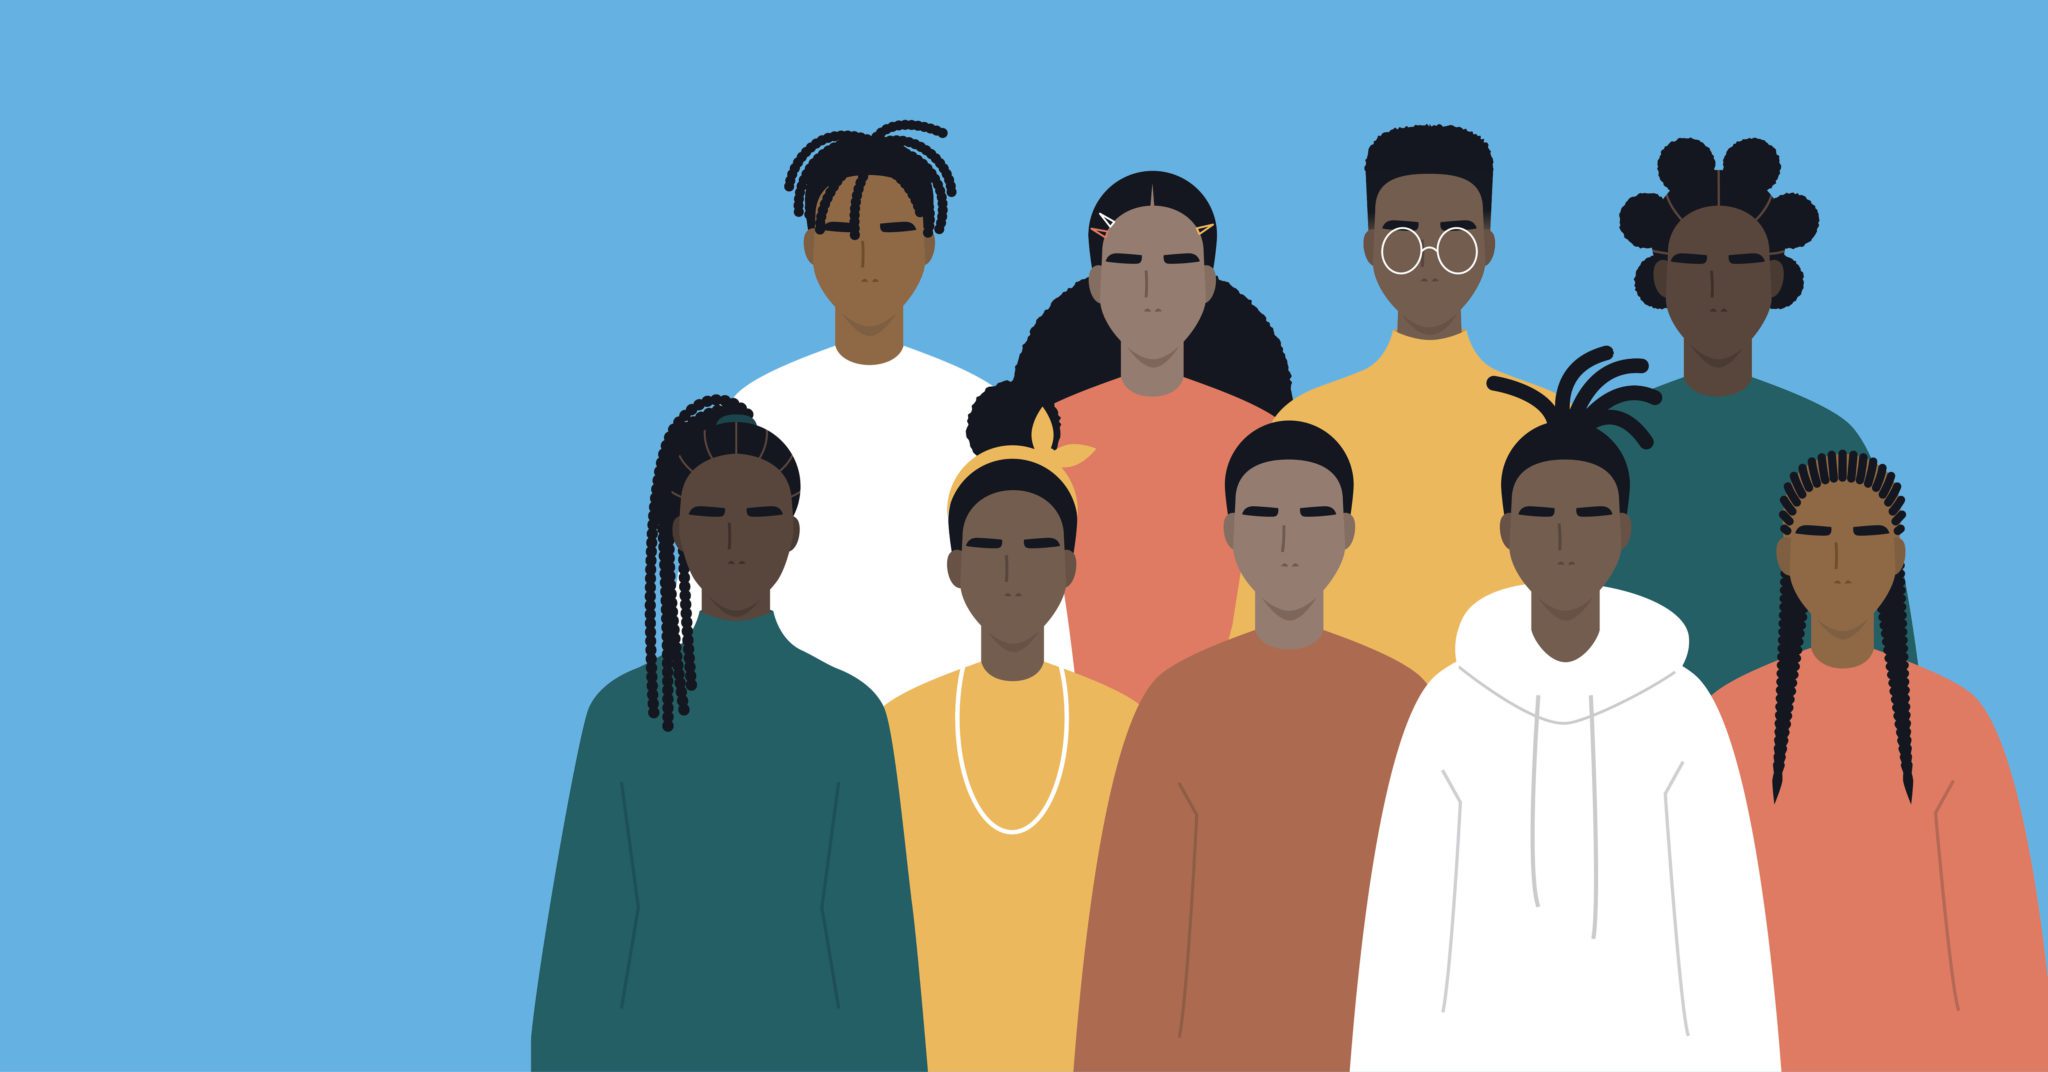 Illustrated graphic of different Black and African-American people. The background is light blue.